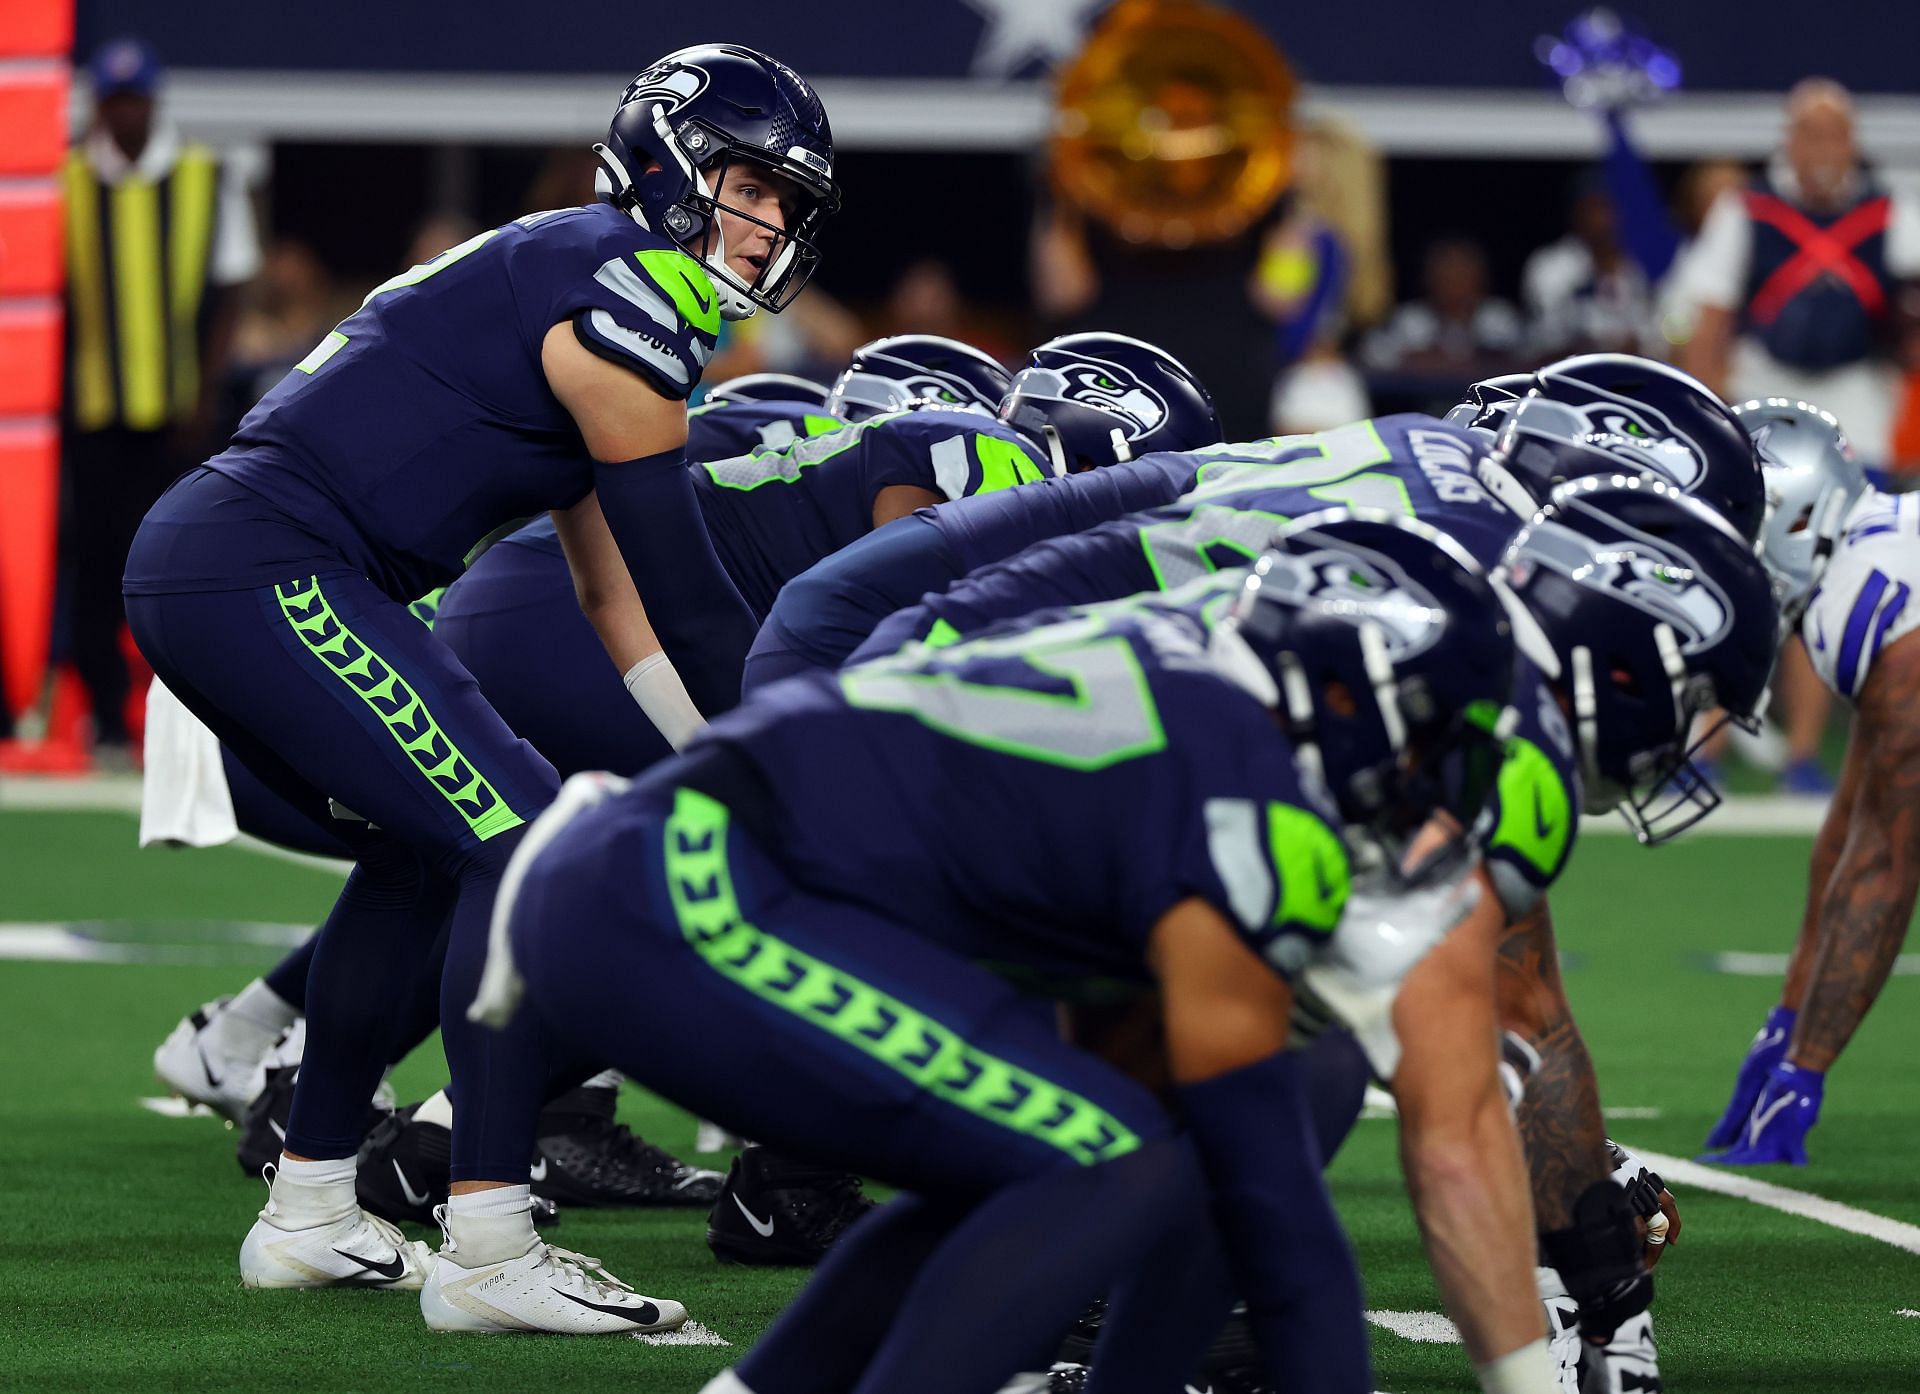 seahawks uniforms through the years